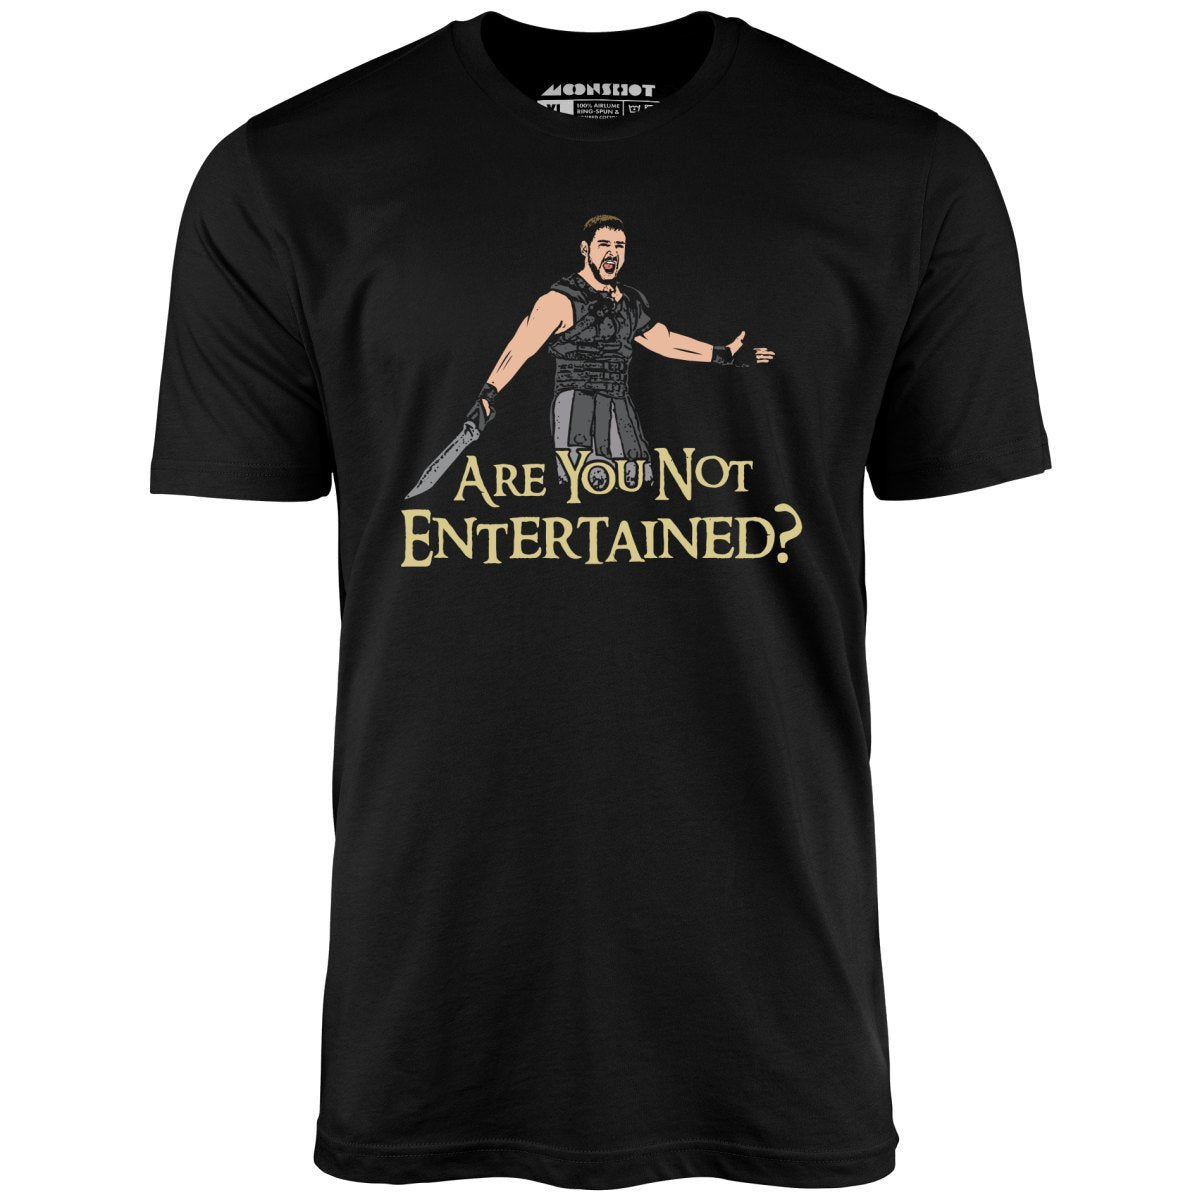 Are You Not Entertained? - Unisex T-Shirt